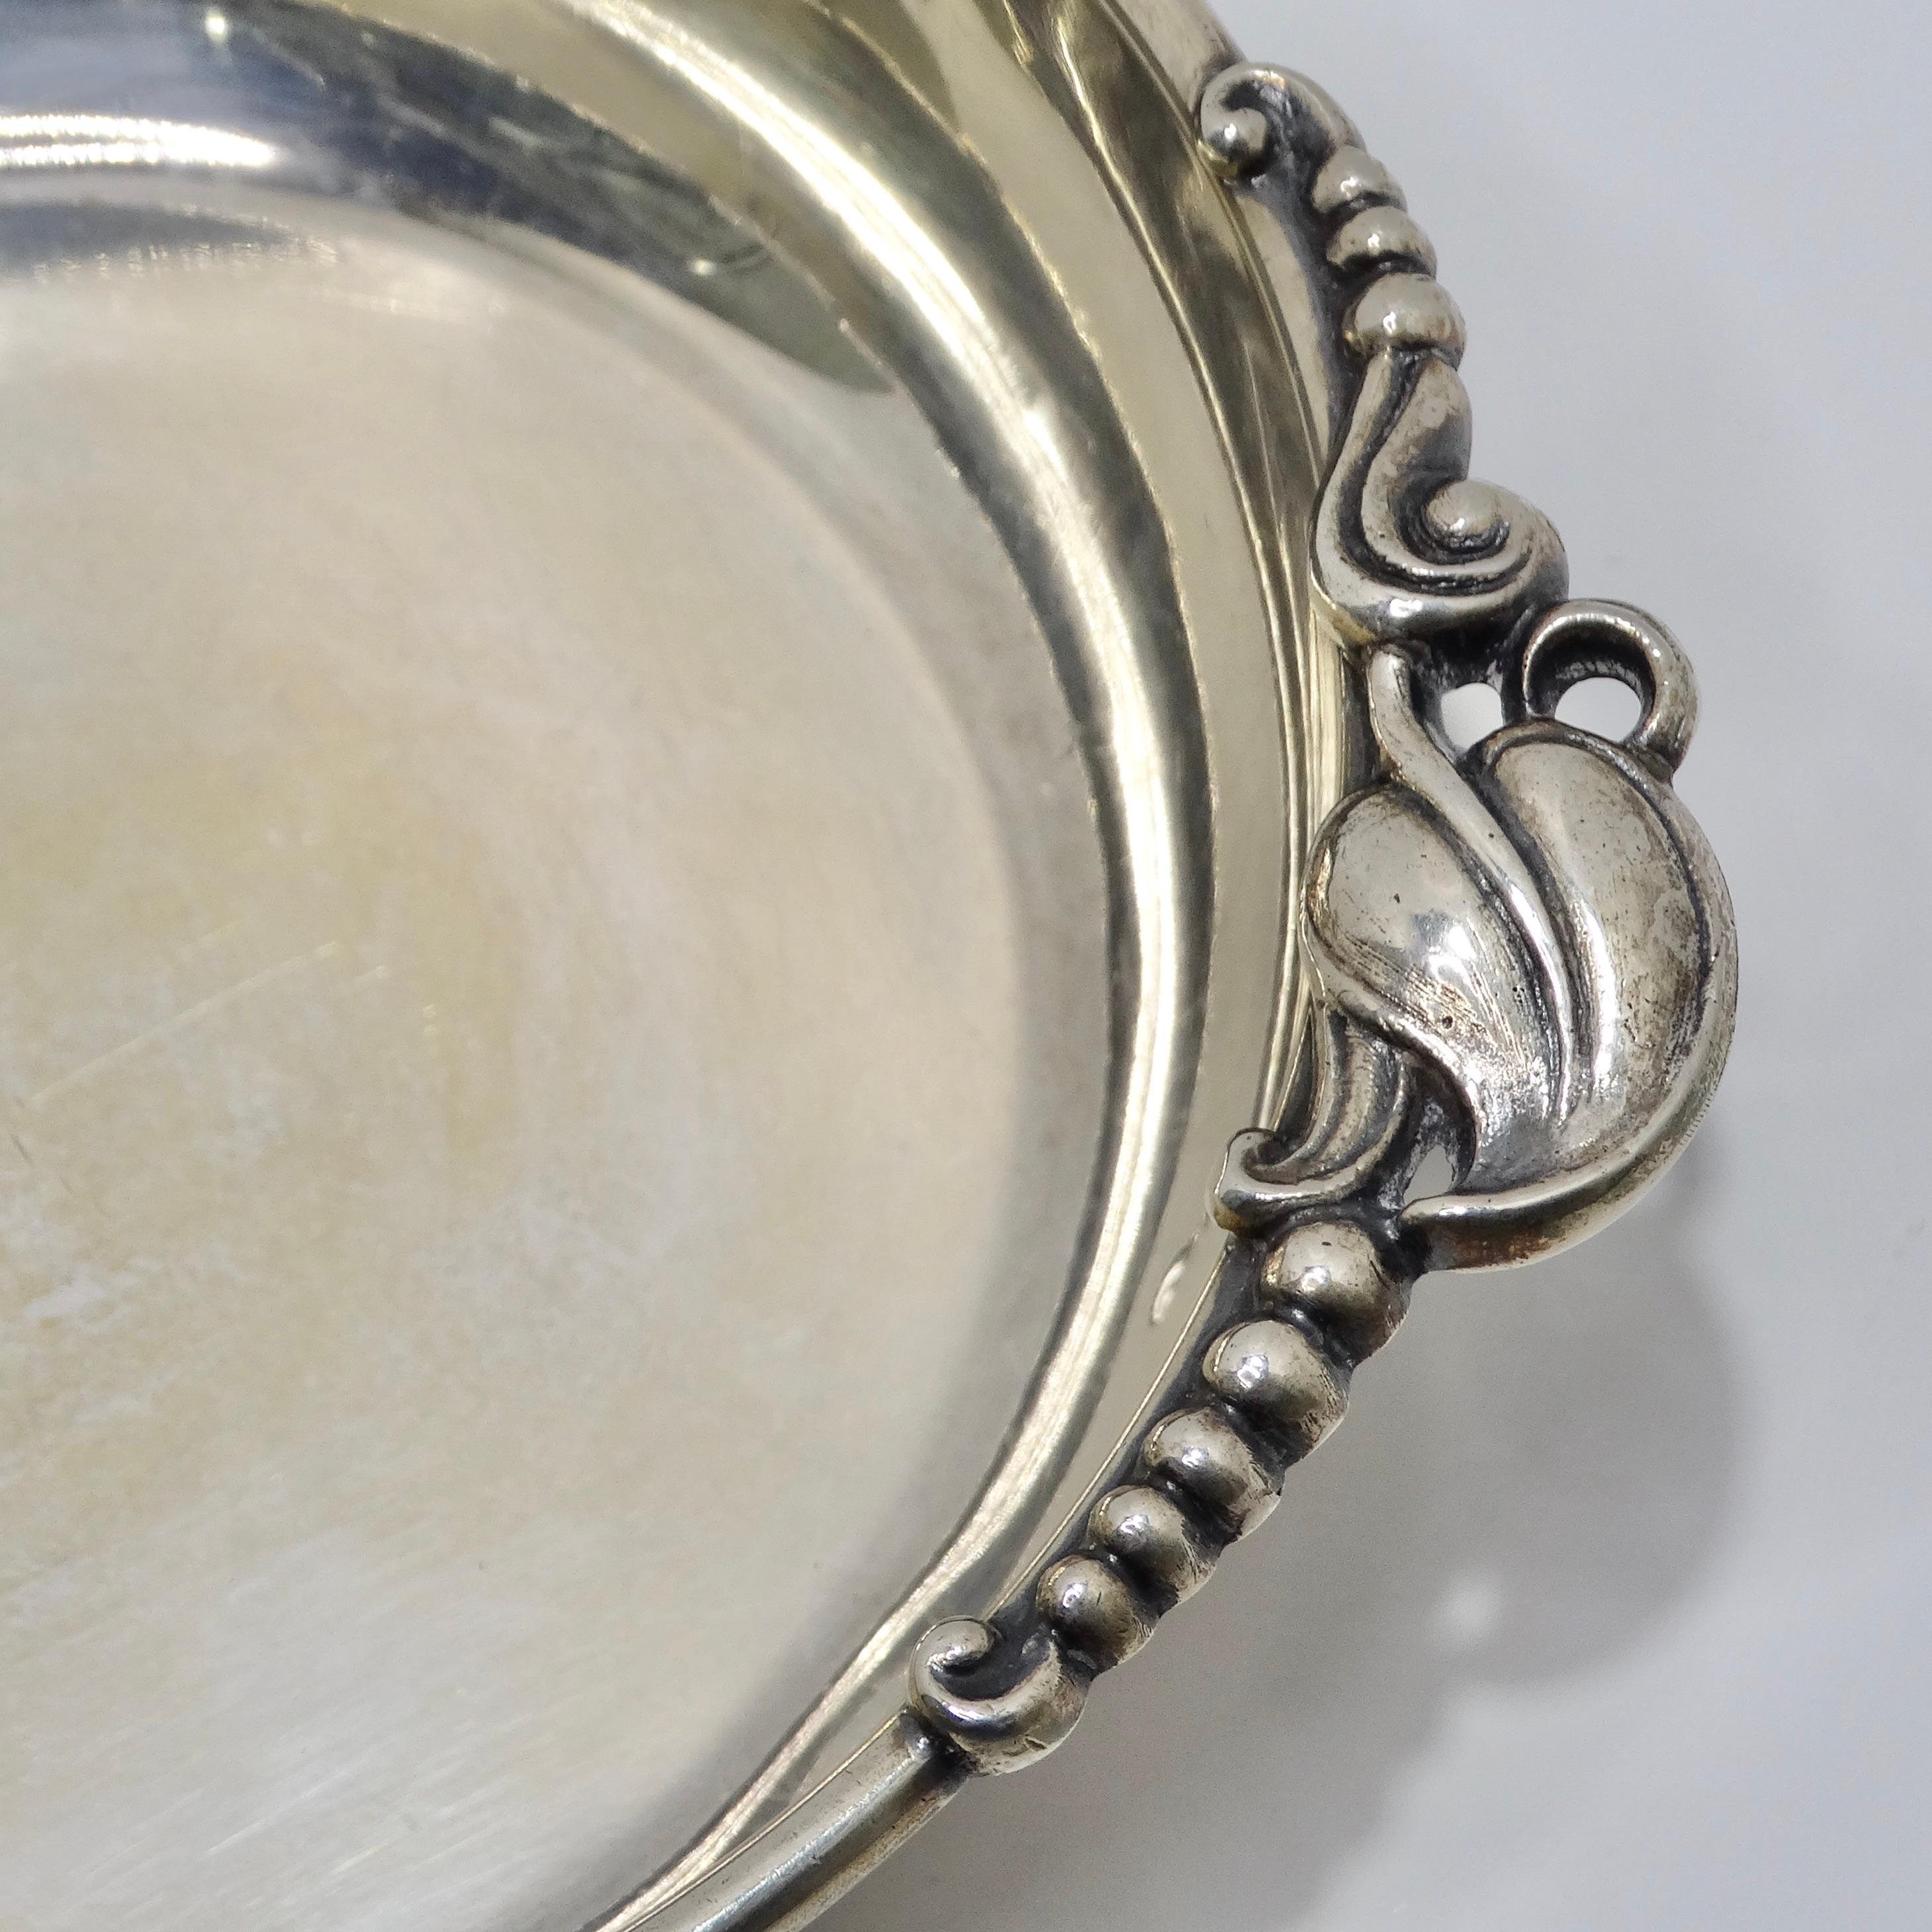 Introducing the Antique Pure Silver Bowl, a breathtaking piece from the early 1900s that epitomizes timeless elegance and luxury.

Crafted with exquisite attention to detail, this pure silver bowl boasts ornate leaf motifs adorning its handles,